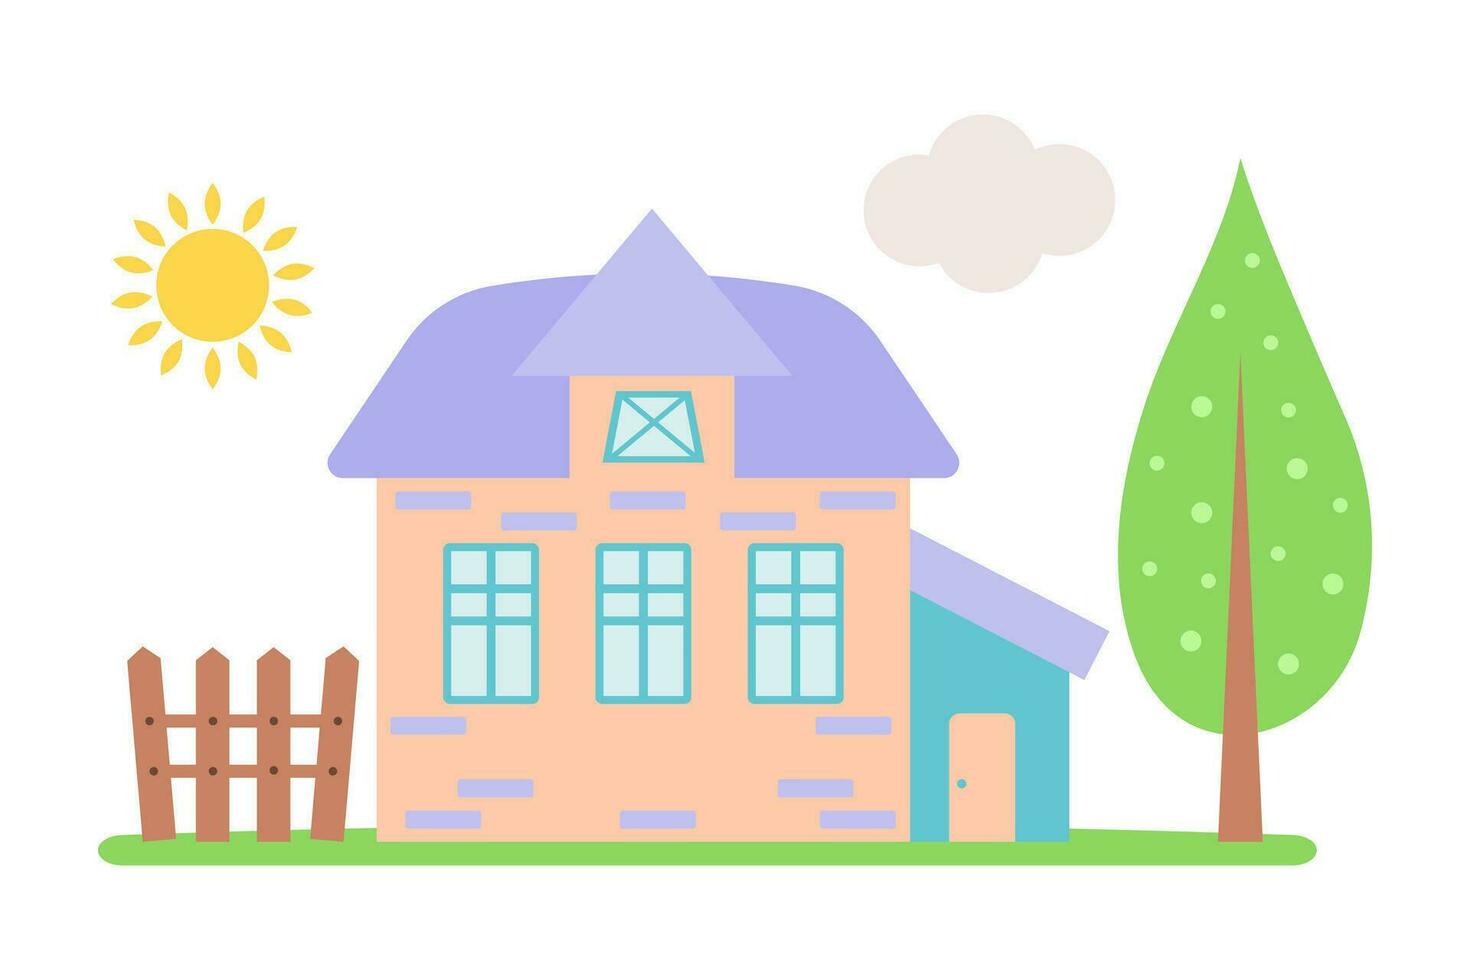 Sweet pastel home with tree, fence, sun and cloud. Cute cartoon dollhouse. Hand drawn vector illustration isolated on white background.